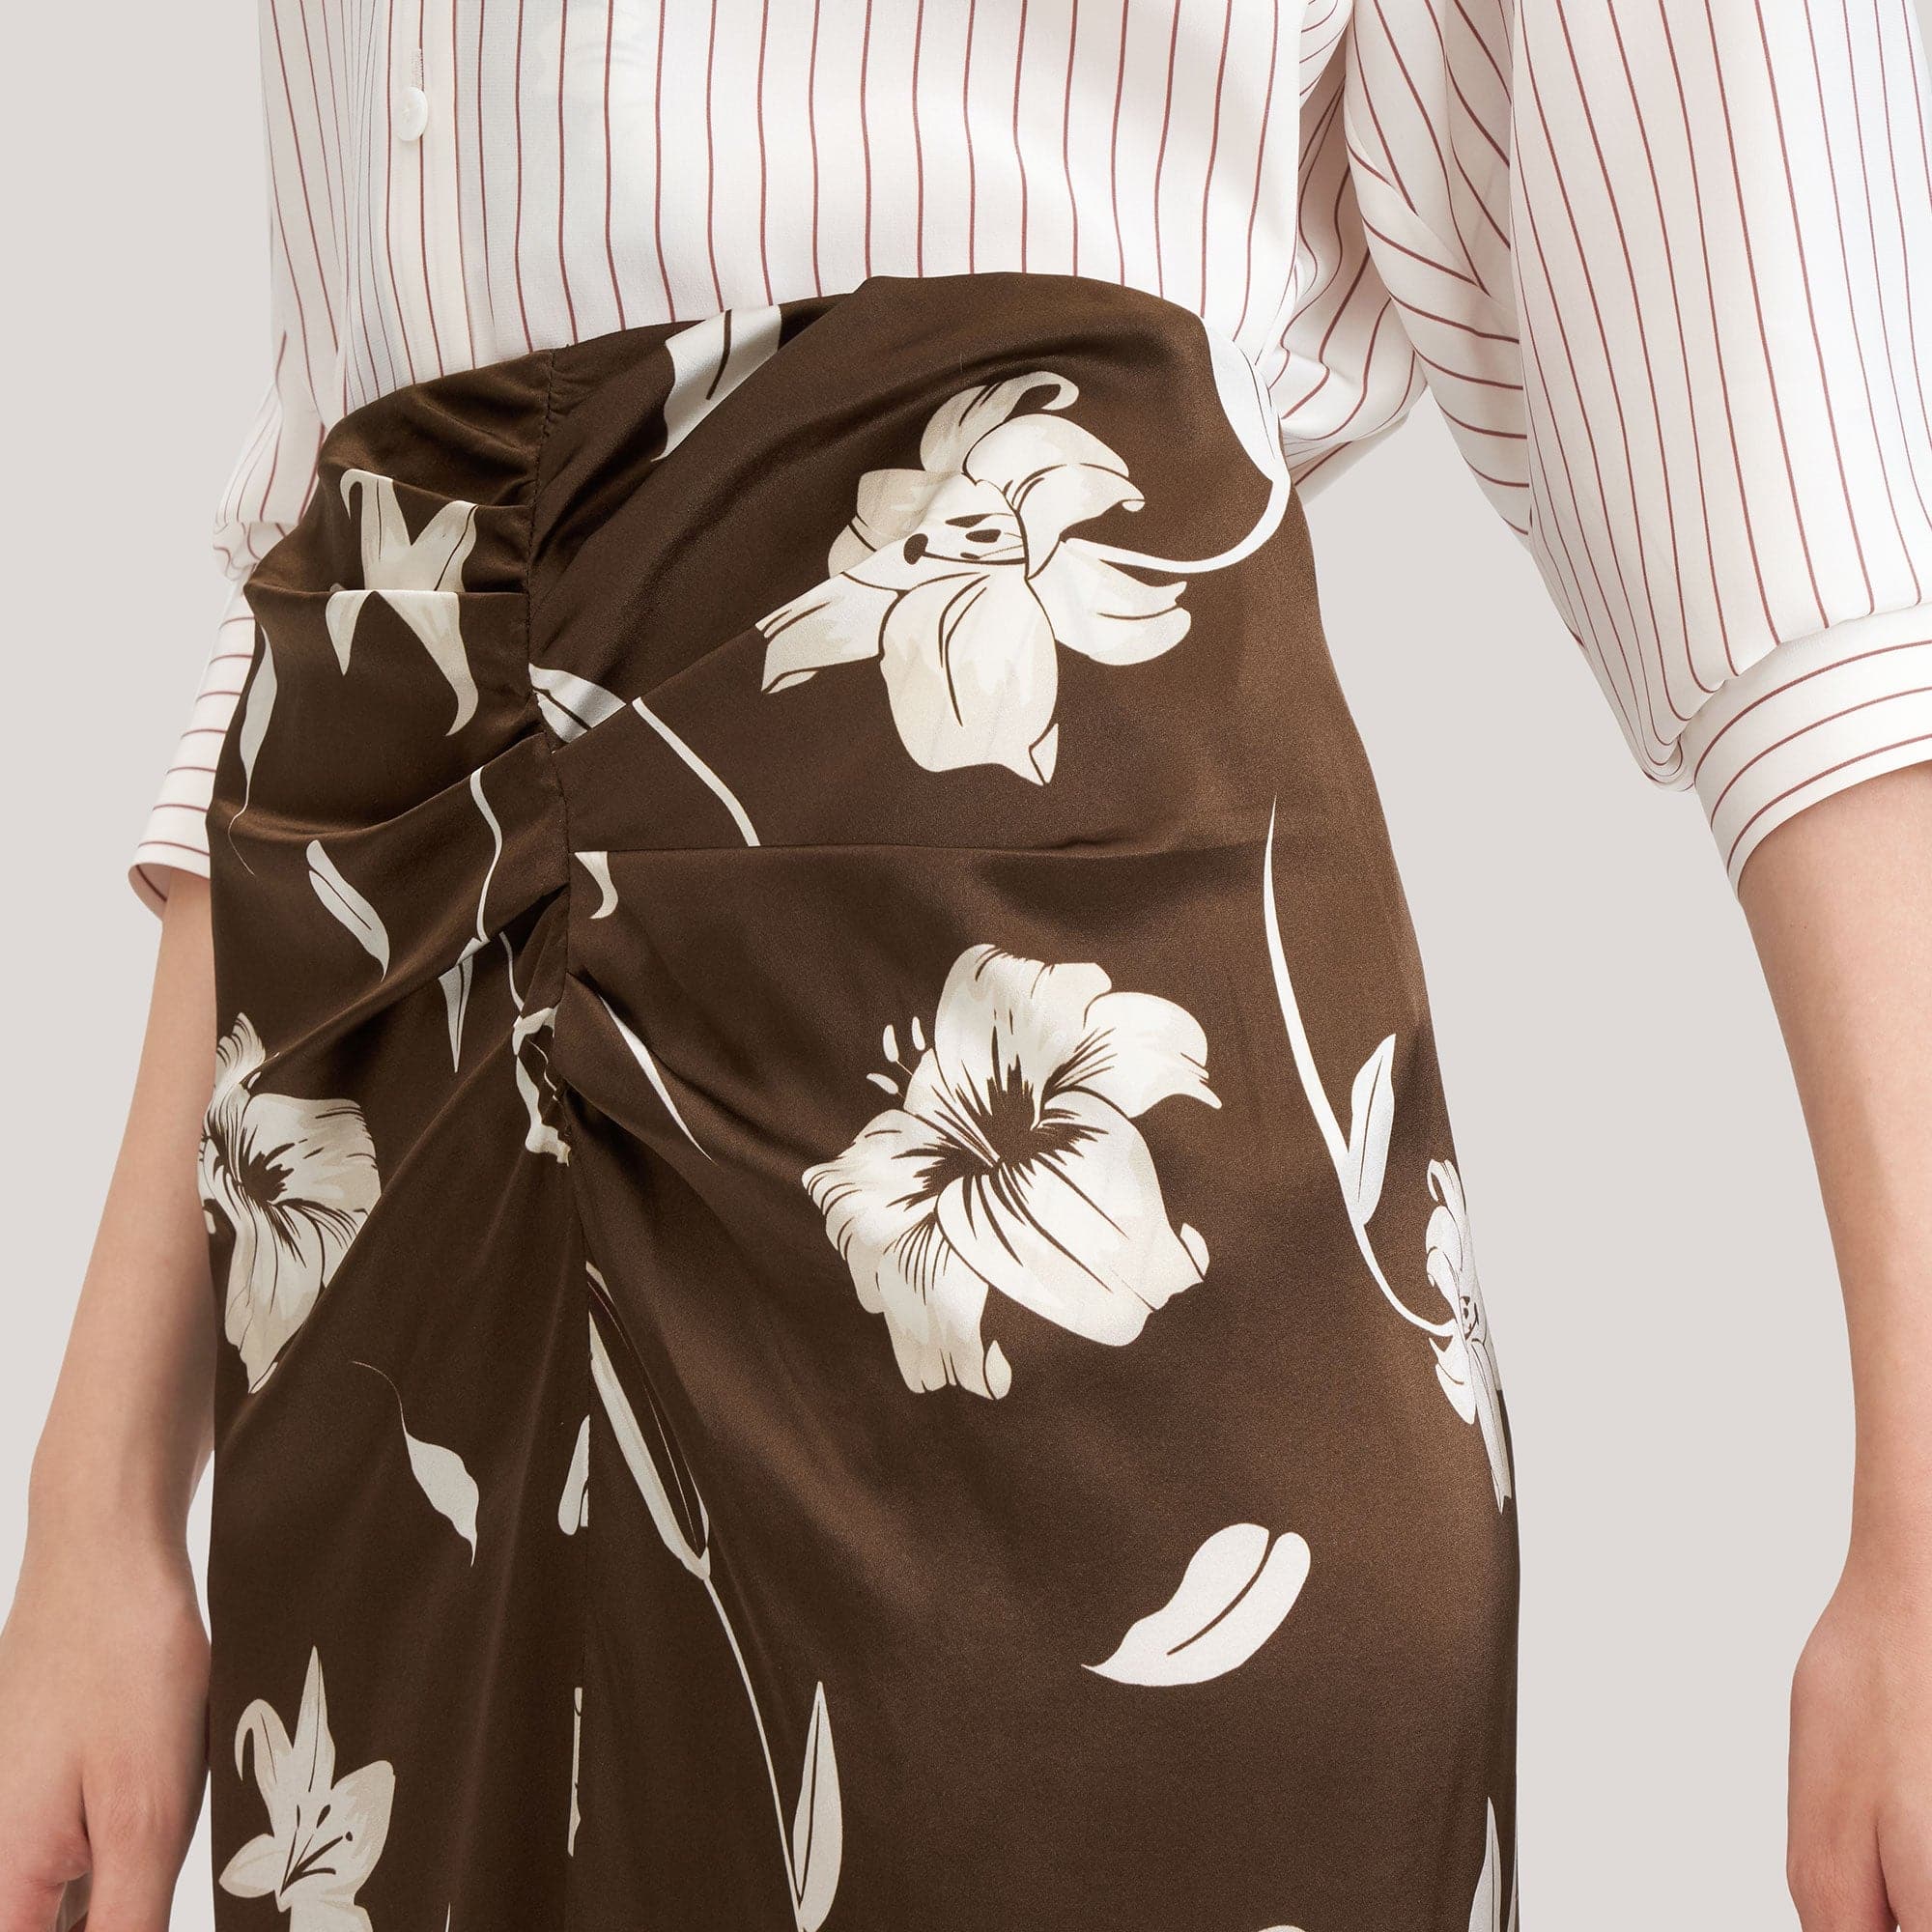 Mulberry Silk Lily Skirt - Wandering Woman